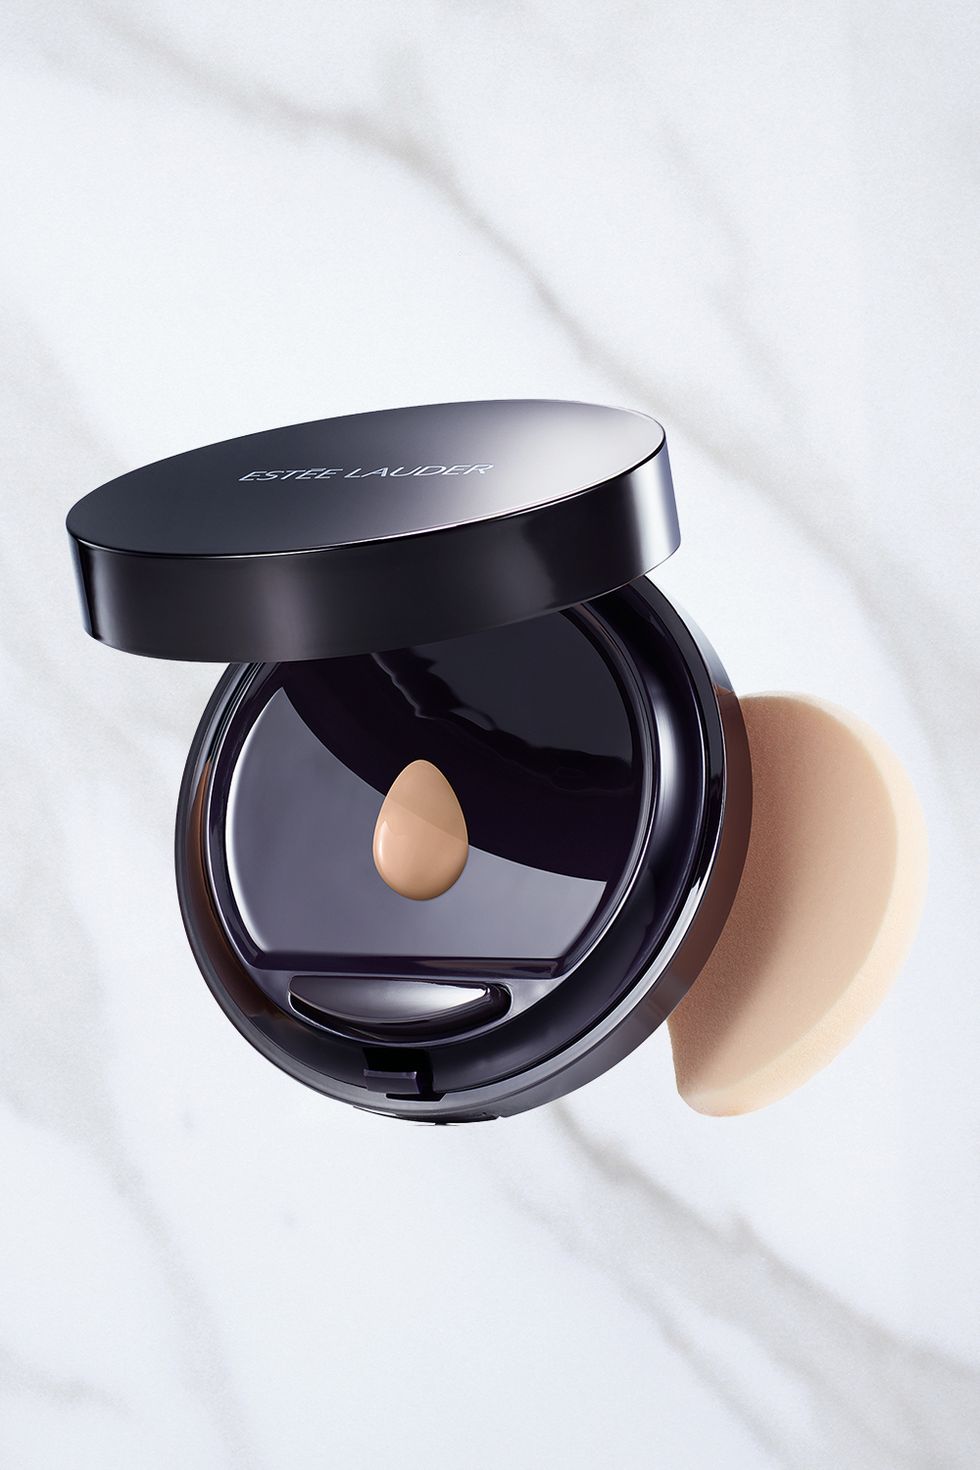 <p>If you want to hide little imperfections or even out your complexion, go for makeup that won't get cakey as the evening wears on. <a href="http://www.esteelauder.com/product/631/36691/Product-Catalog/Makeup/Double-Wear/Makeup-To-Go" target="_blank">Estée Lauder Double Wear Makeup To Go</a>, $45, gives just enough natural-looking coverage. </p>